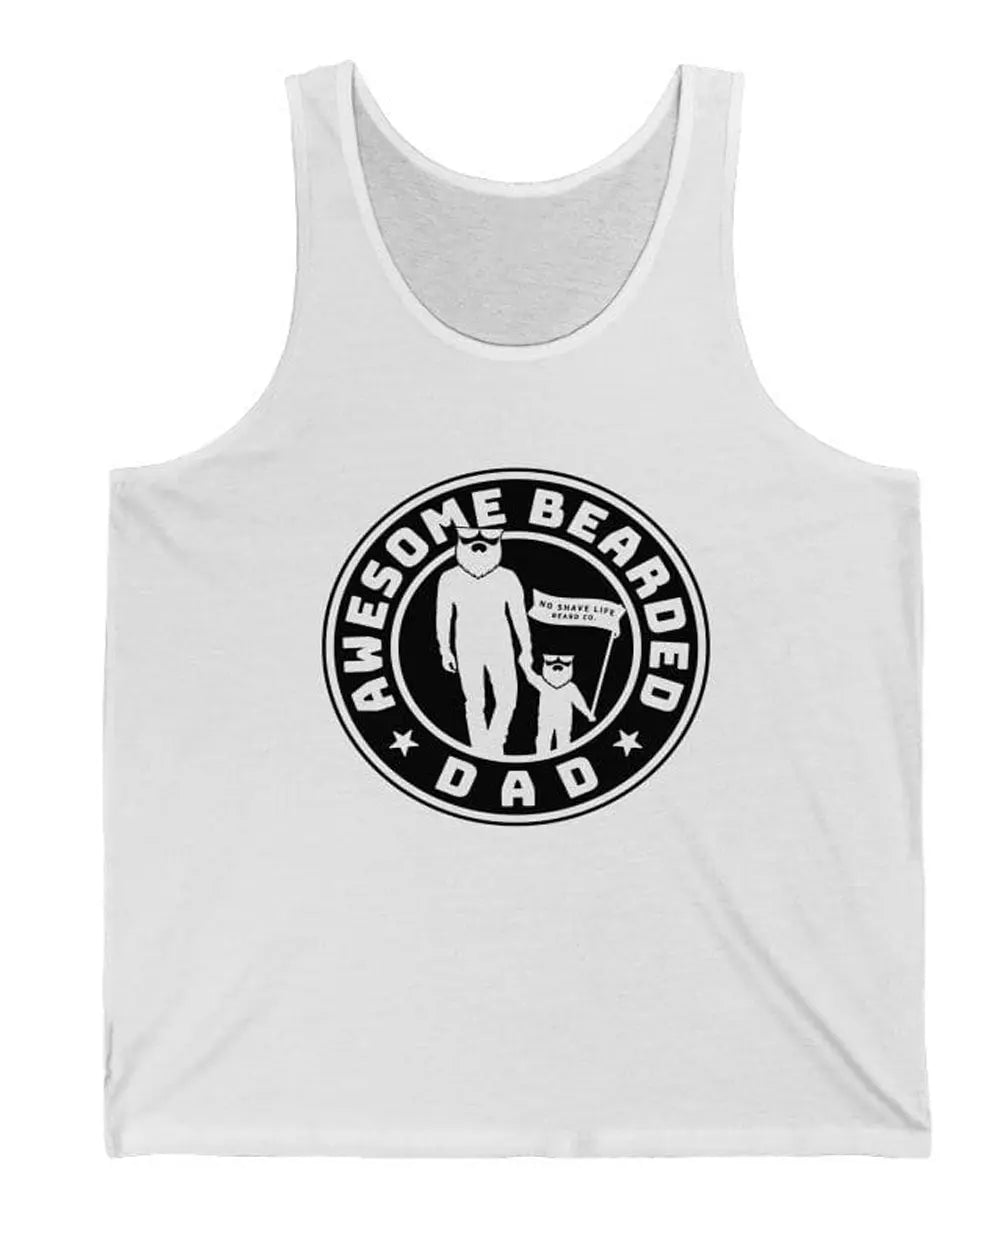 AWESOME BEARDED DAD White Men's Tank Top|Mens Tank Top